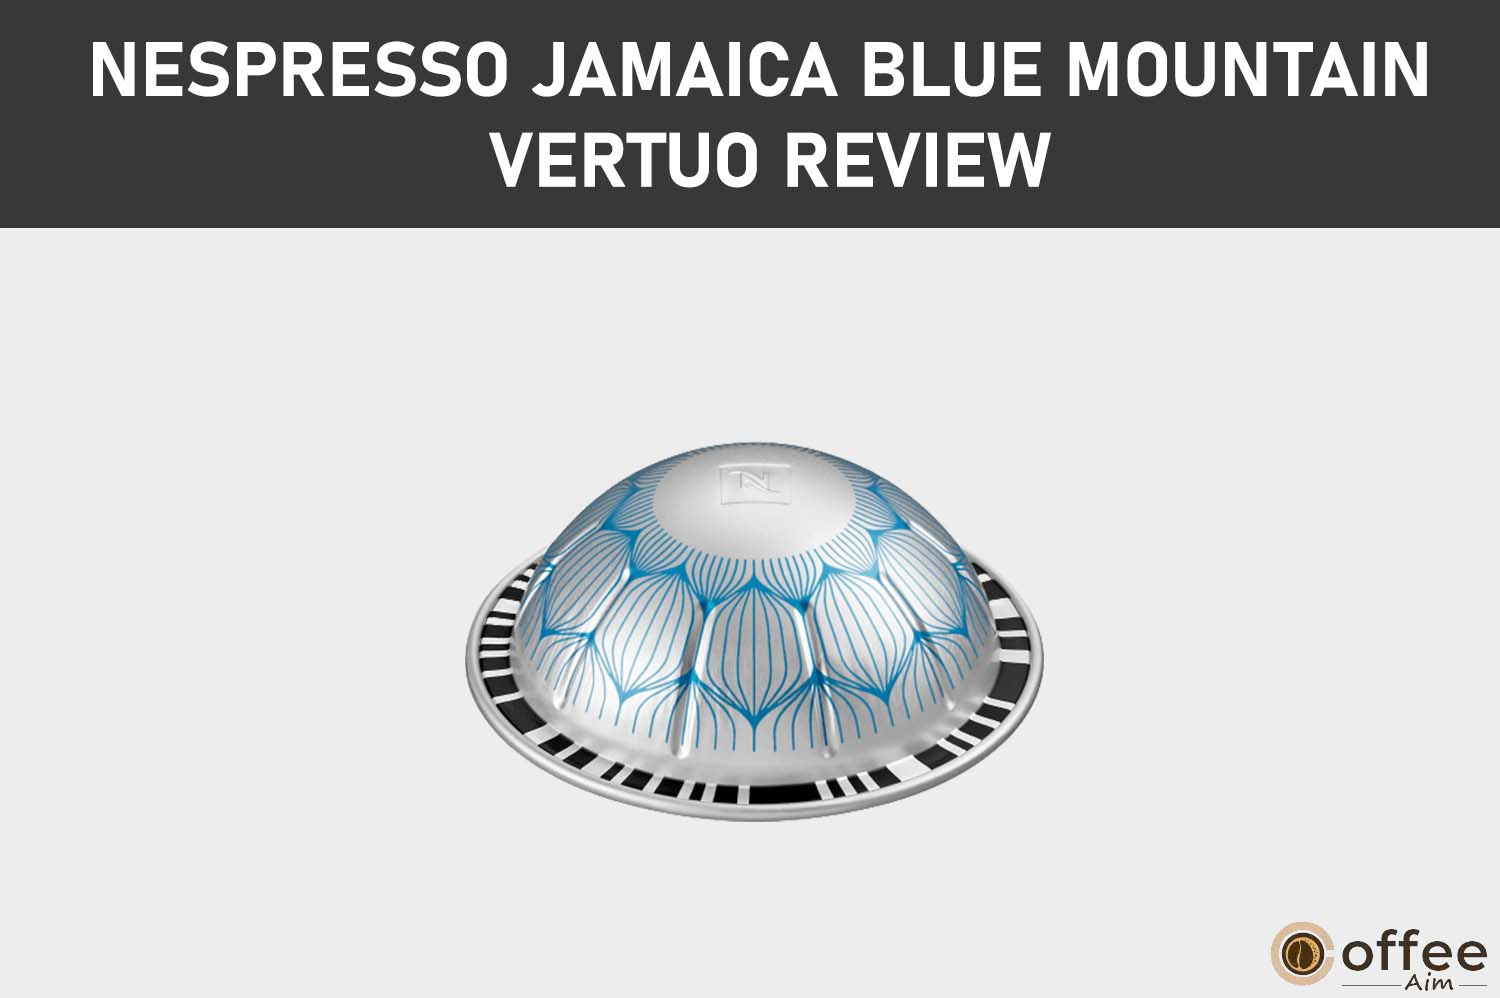 Featured image for the article "Nespresso Jamaica Blue Mountain Vertuo Review"